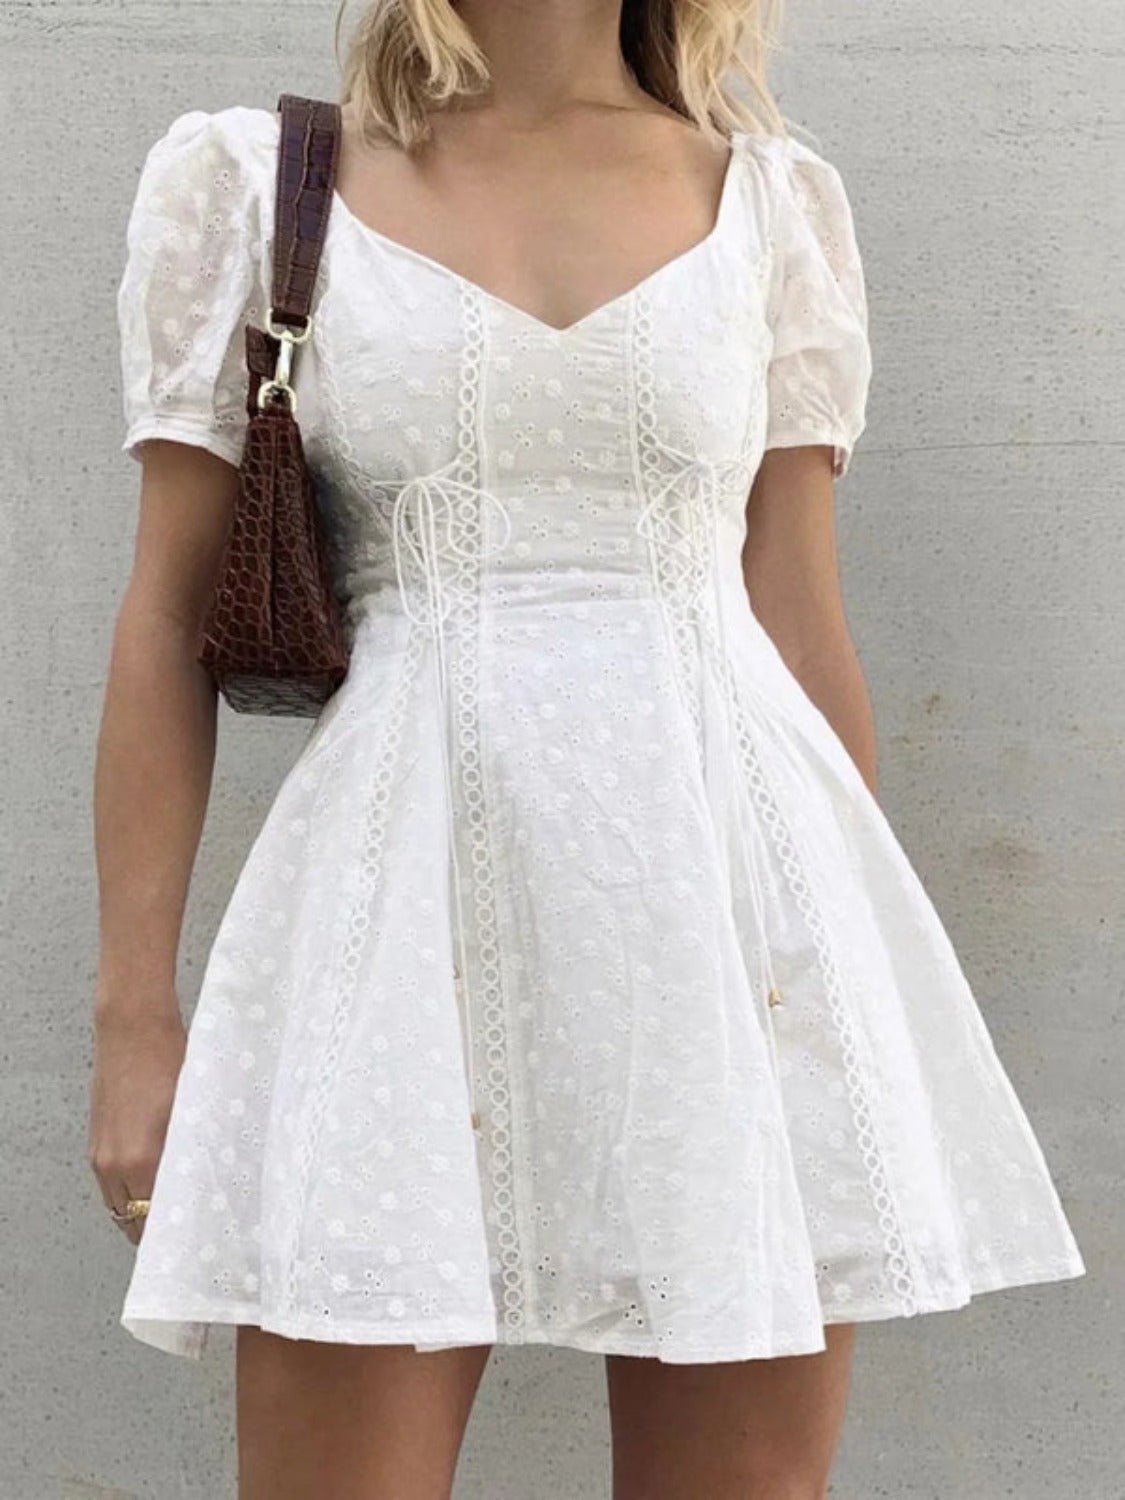 Women's Lace Embroidery Sexy Low Cut Square Neck Puff Sleeve Dress - KECHENFS